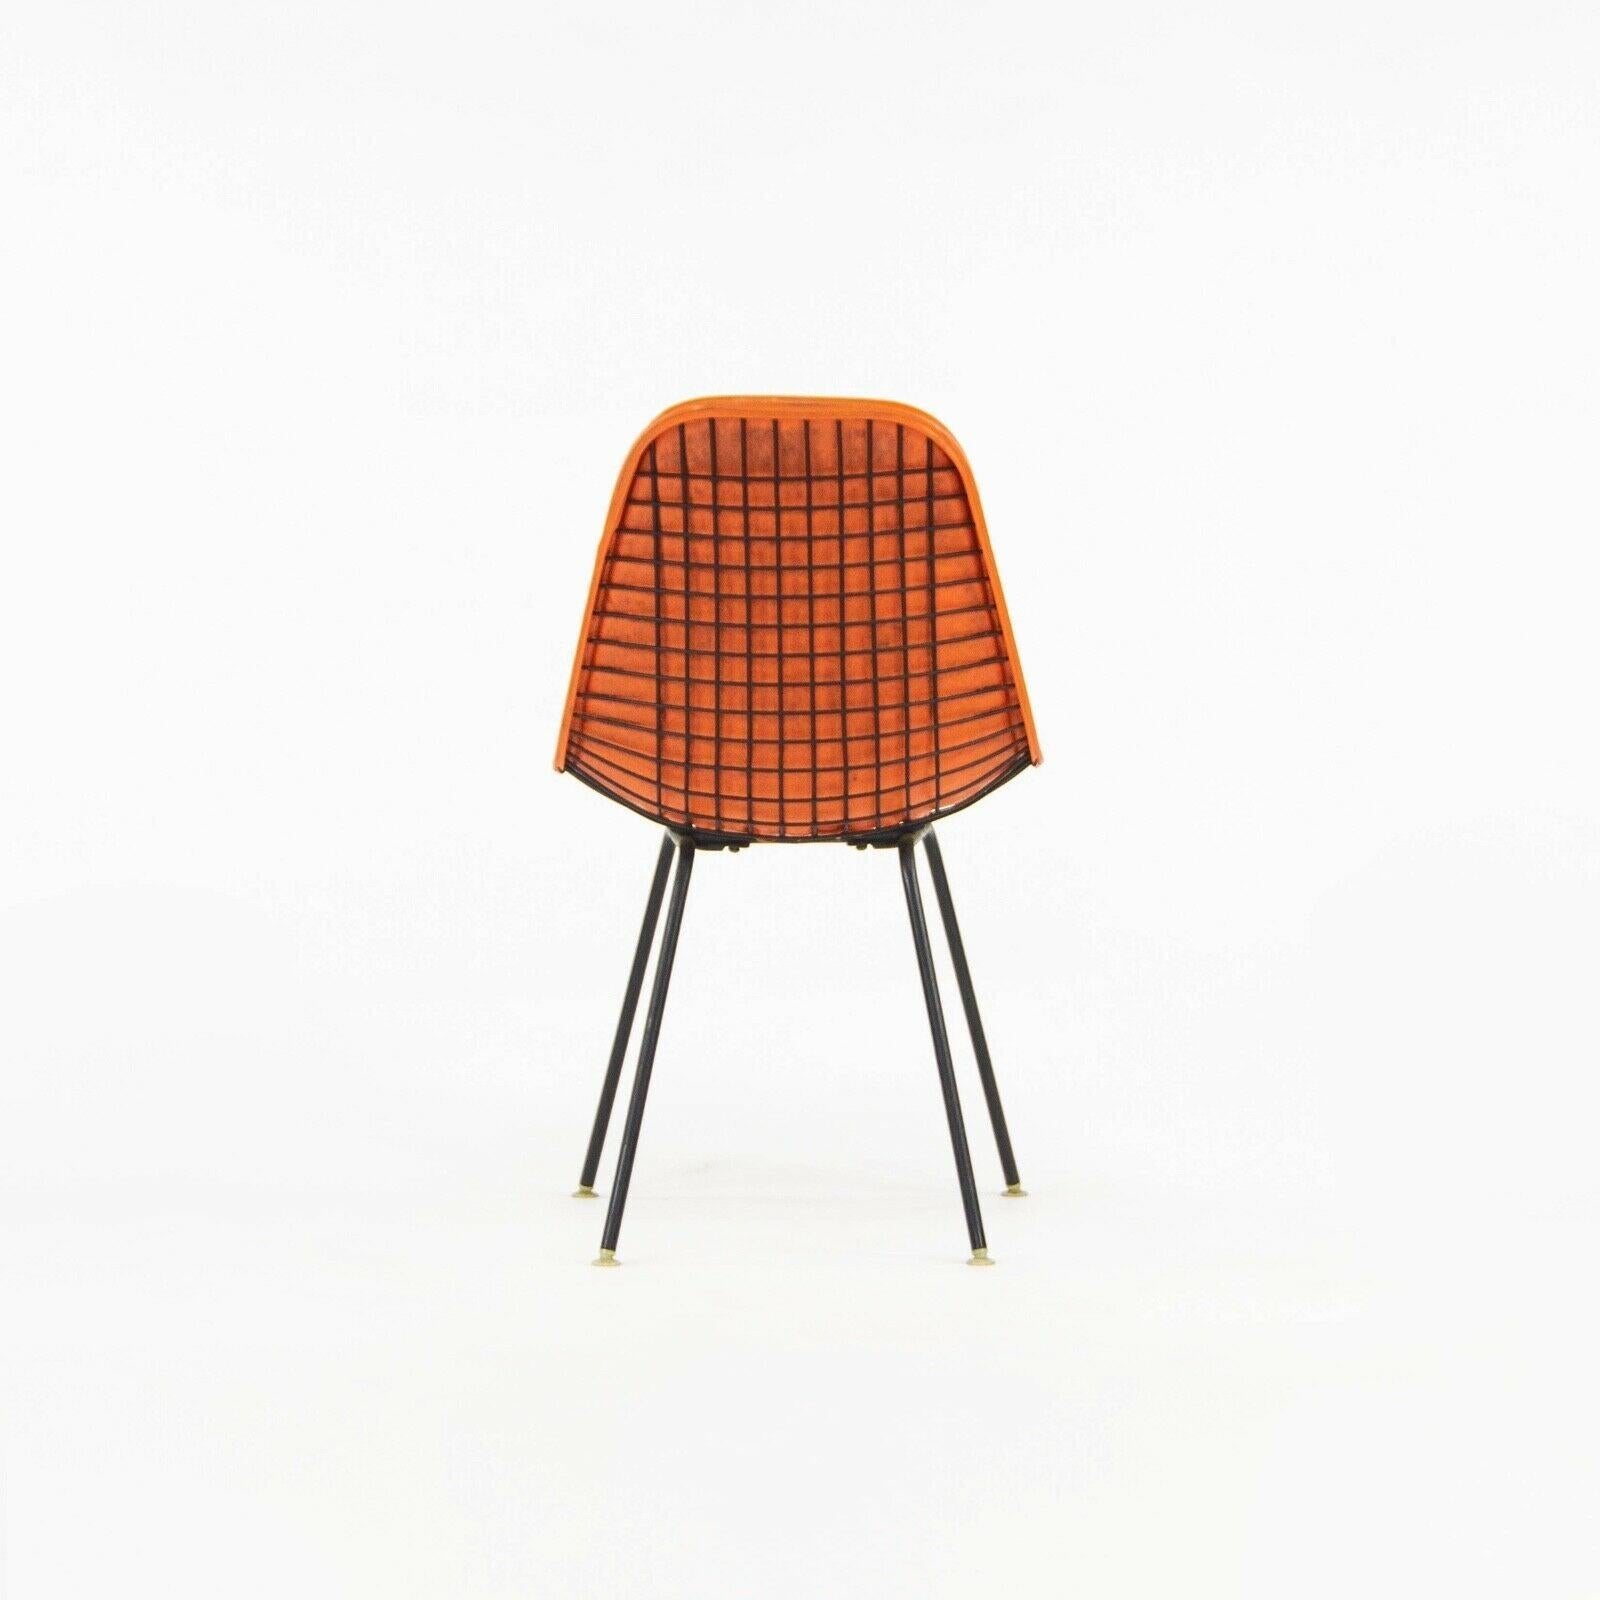 1957 Herman Miller Eames DKX Wire Dining Chair with Full Naugahyde Orange Pad In Good Condition For Sale In Philadelphia, PA